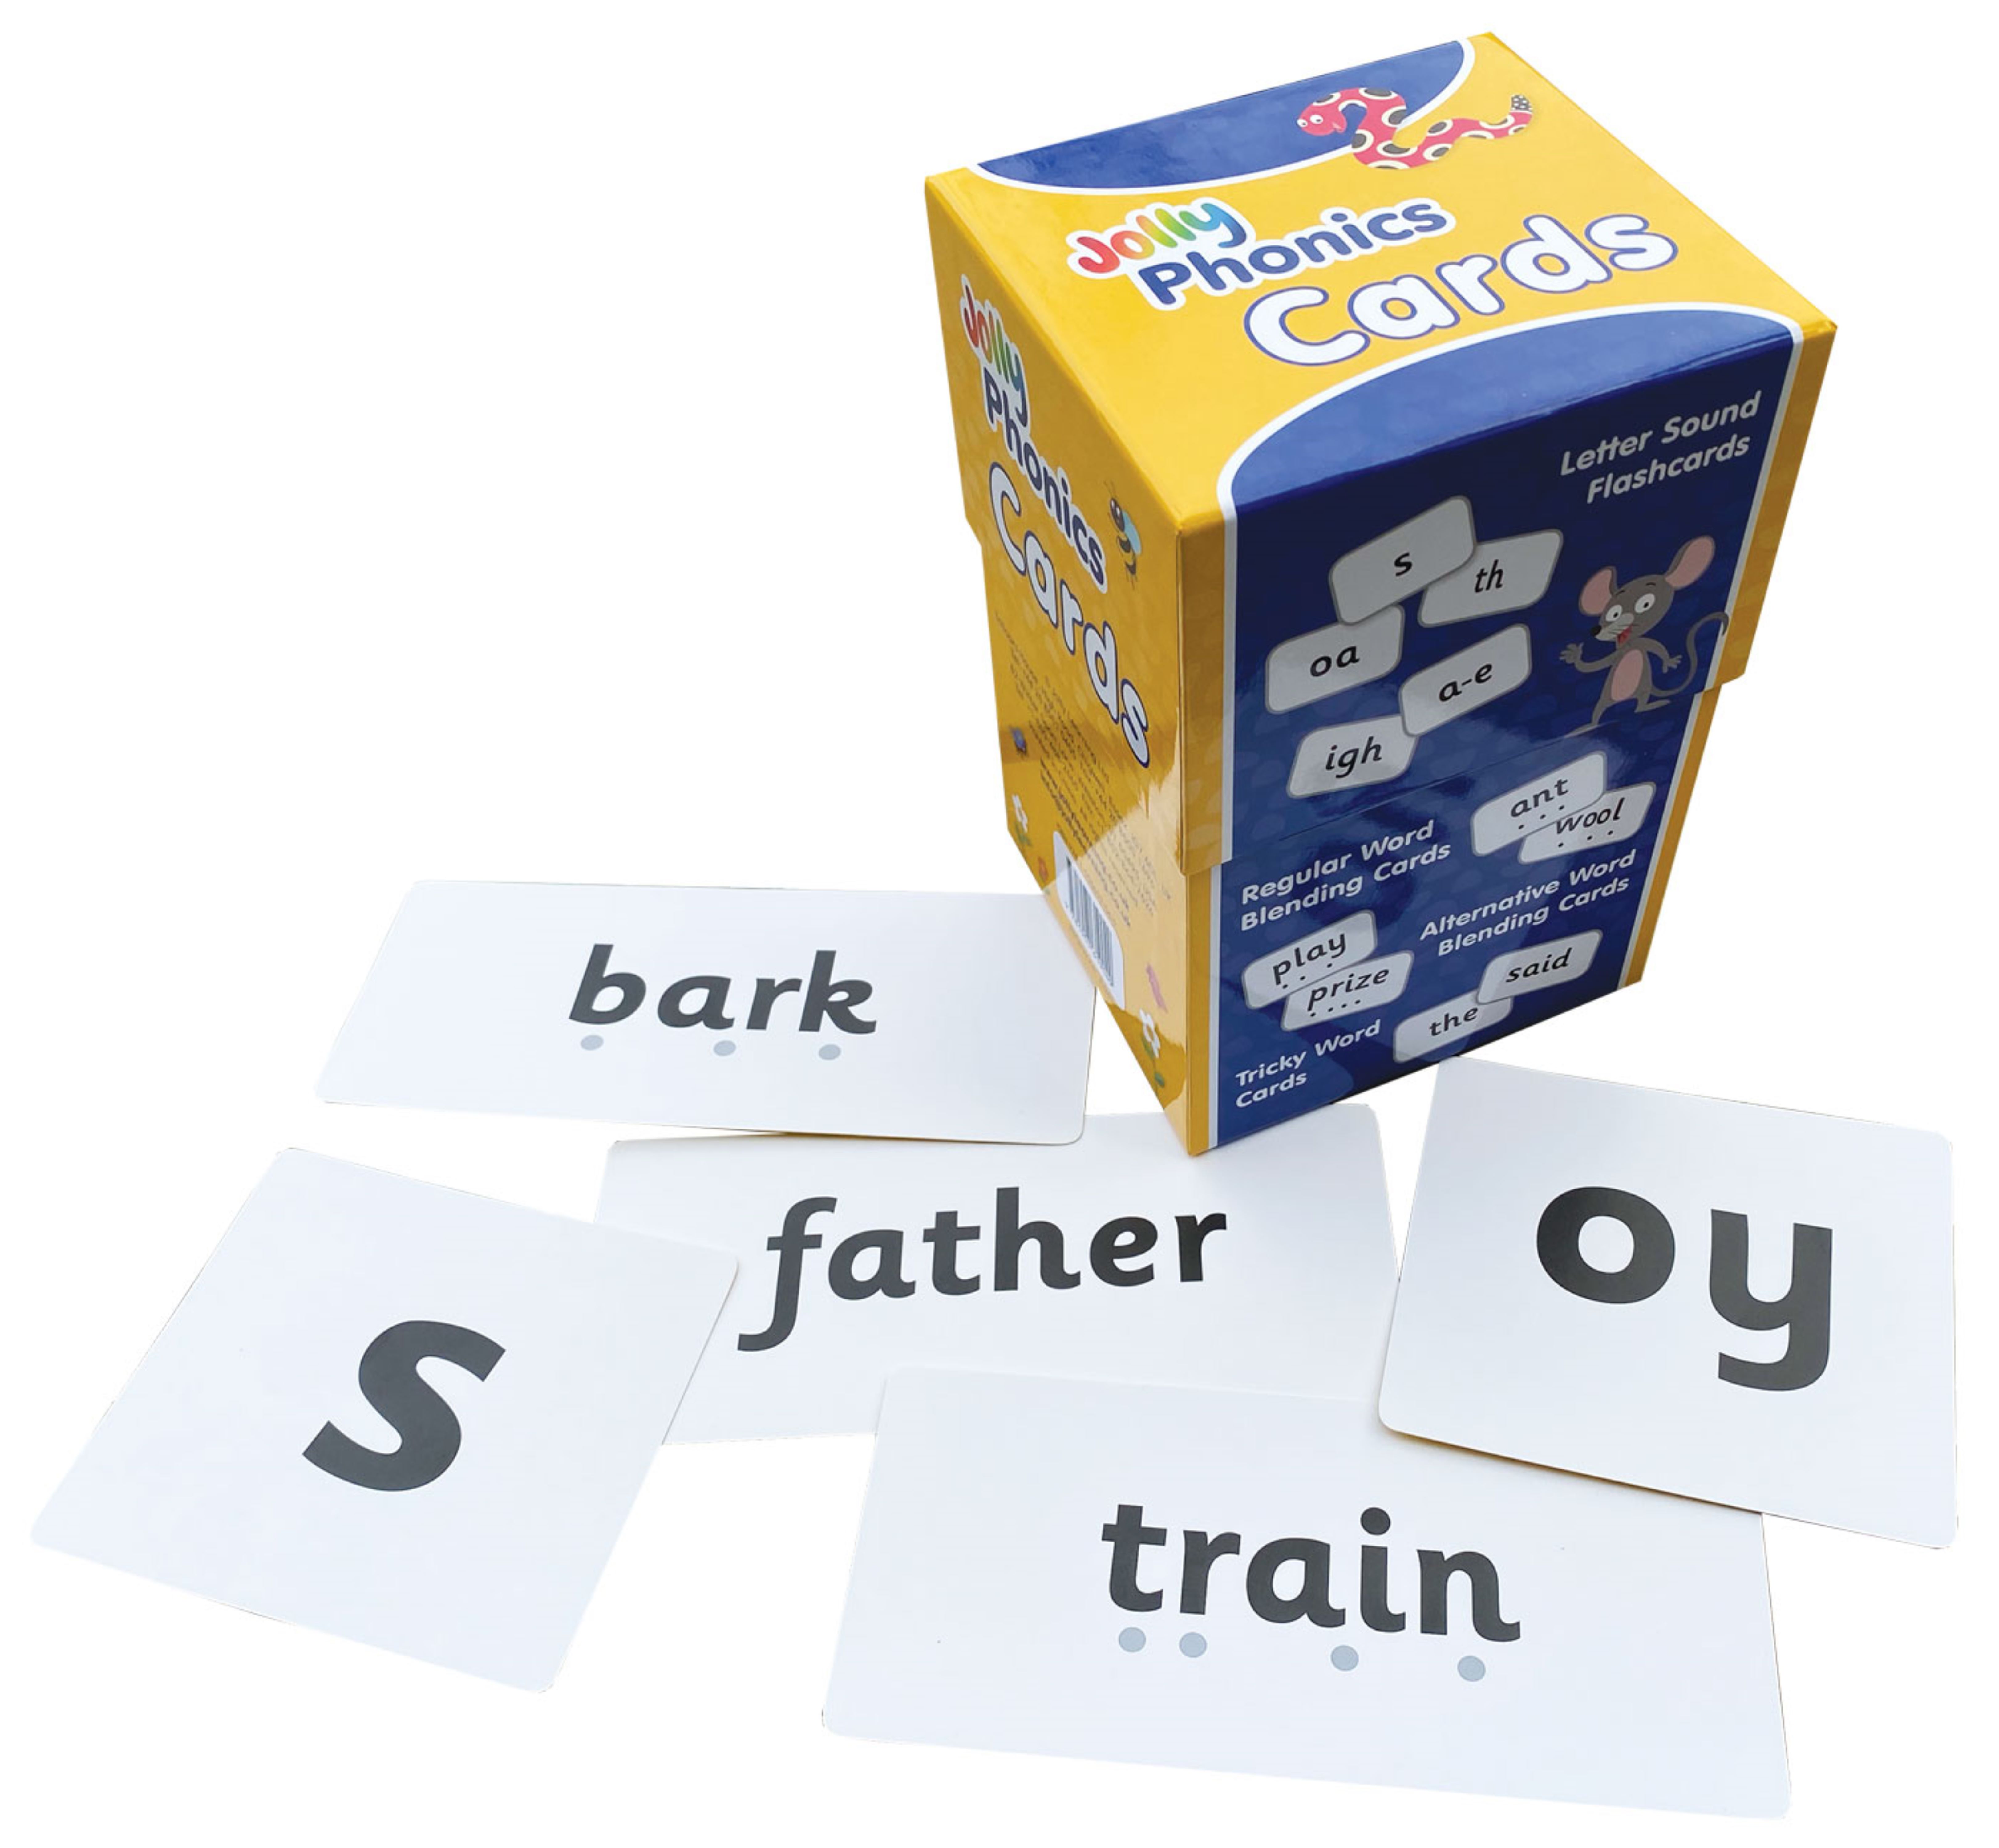 Flash　Jolly　Letter/Sound　Supplies　A490457　AtoZ　Phonics　Cards